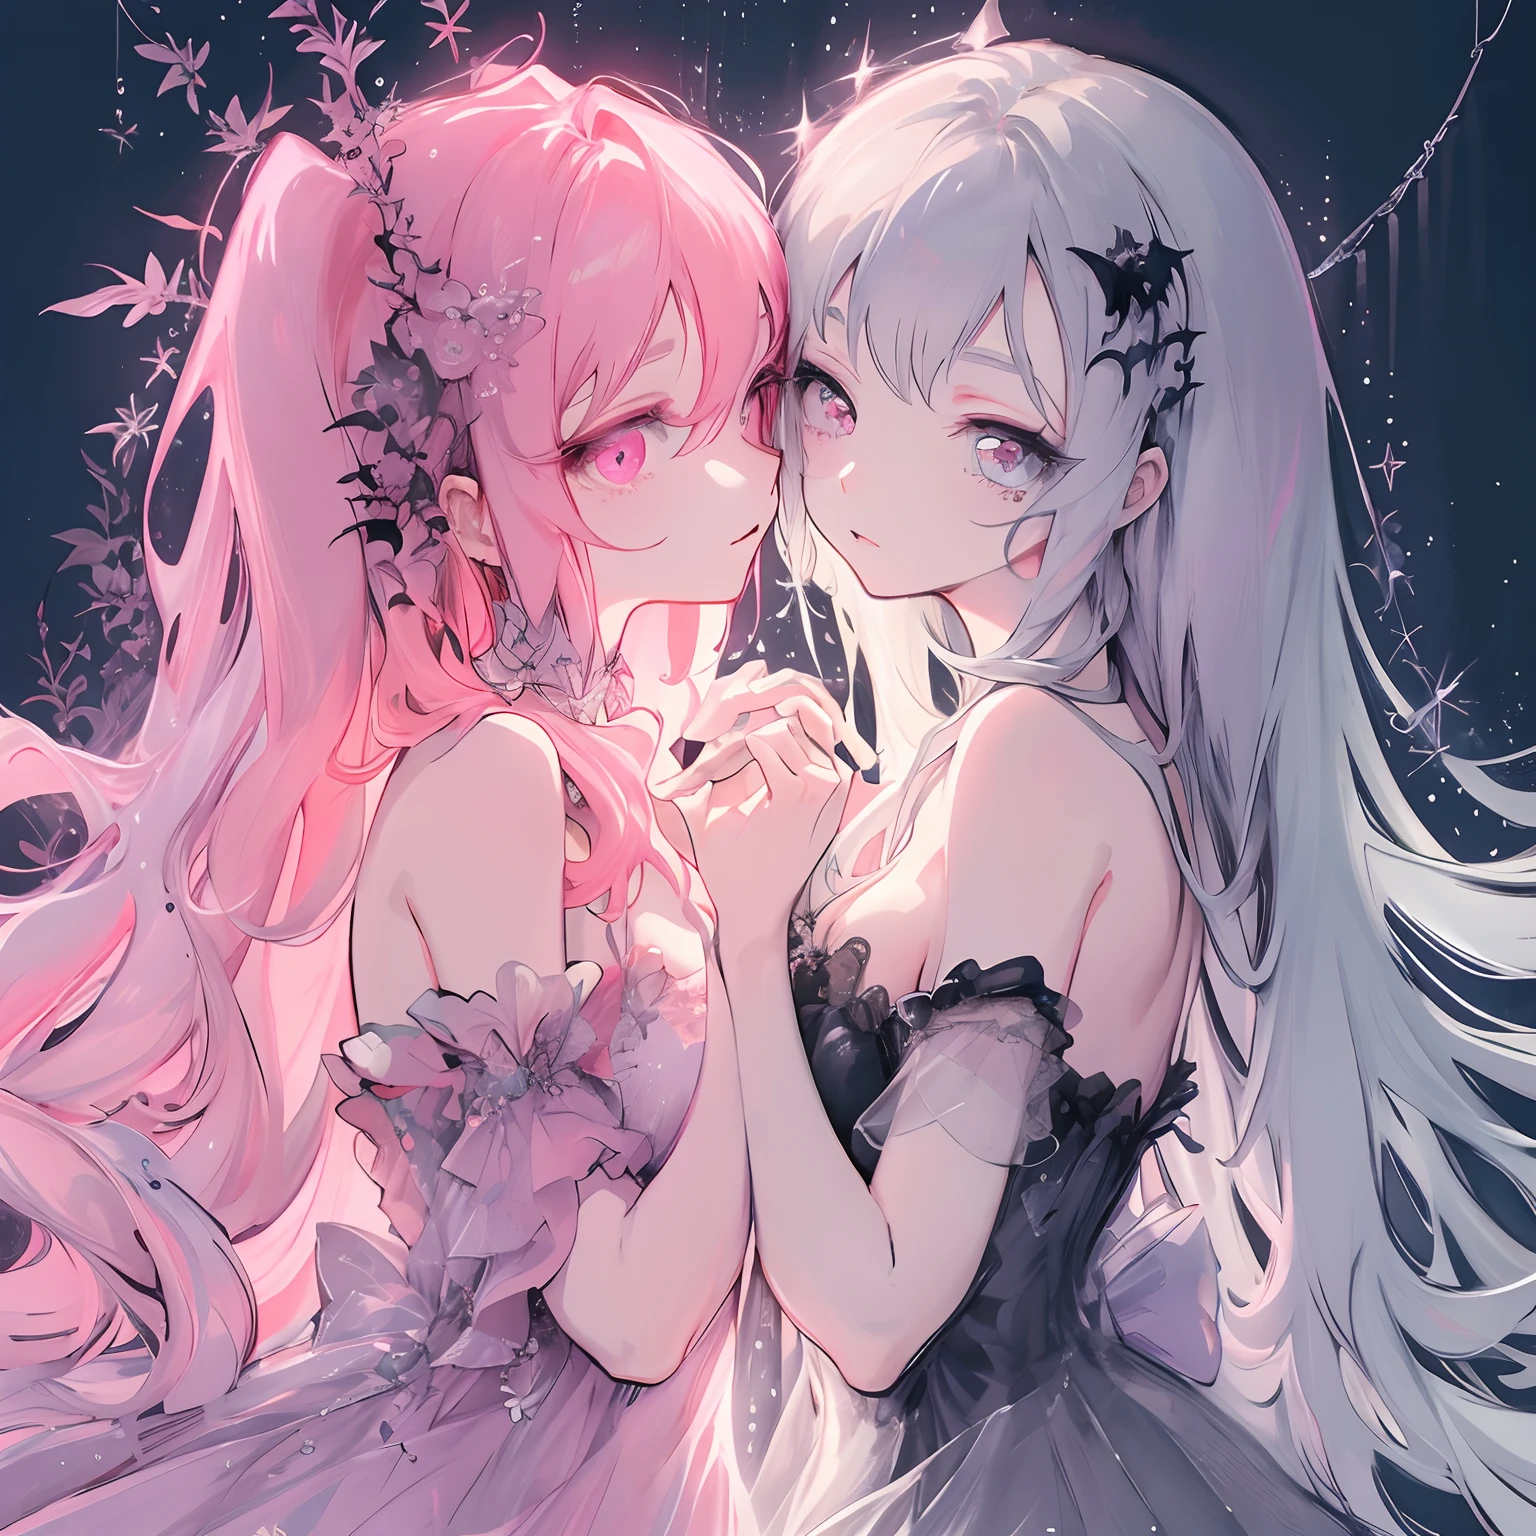 Anime vampire girl,long pink hair,multi coloured hair,detailed hair, silver eyes,sparkle eye,highly detailed eye,holding black Lily bouquet,detailed flowers,white cute dress,Anime vampire girl in cute dress,elegant and delicate, detailed artwork, highest quality artwork,high resolution ,sorrowful face,highly detailed face,best quality